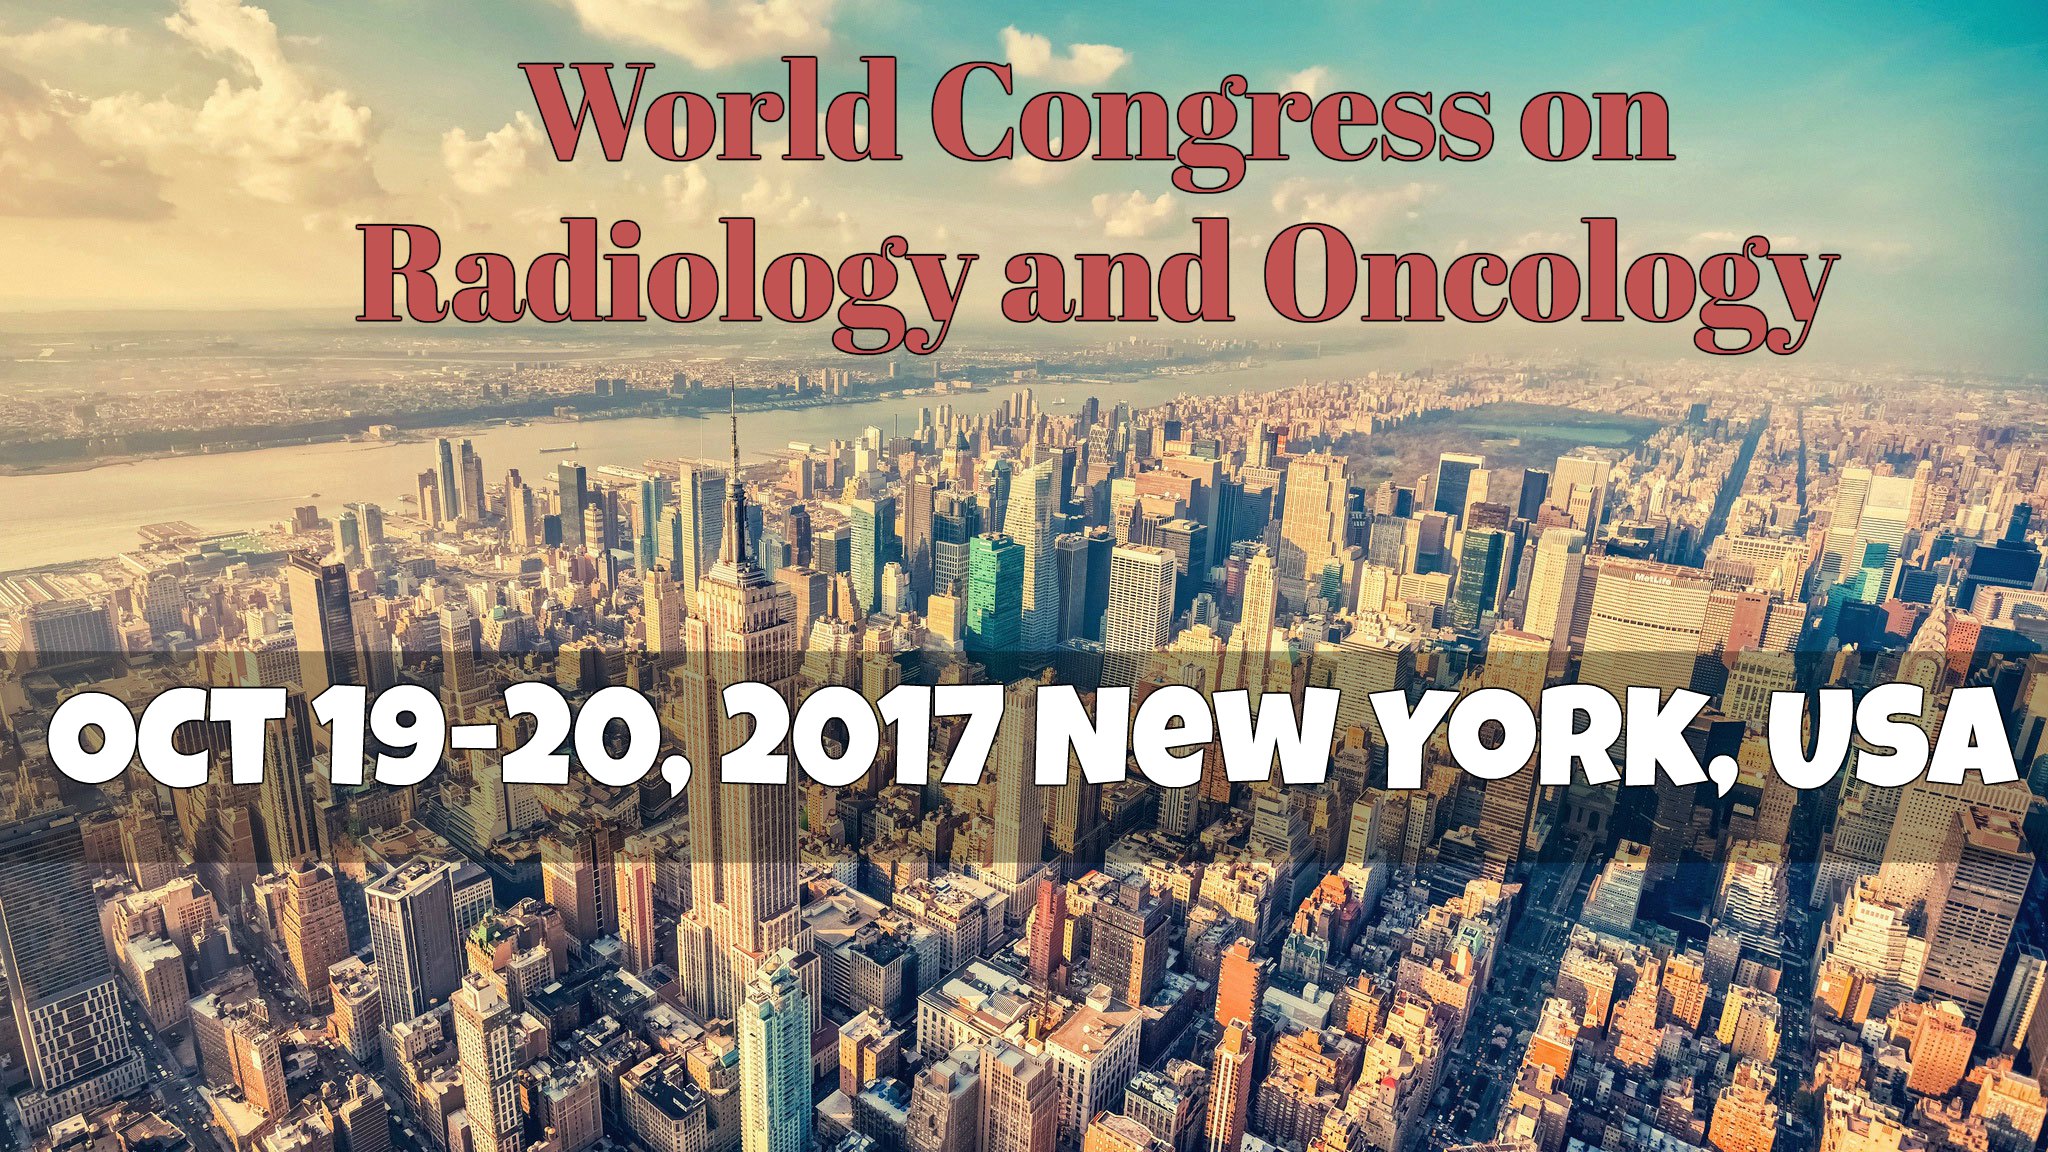 Theme: Advancing Radiology in the multidisciplinary management of Oncology 
 Conferences invites all the participants from all over the world to attend World Congress on Radiology & Oncology during October 19-20, 2017 in New York, USA which includes prompt Keynote presentations, Oral talks, Poster presentations and Exhibitions.

 Conference Website: http://radiology.conferenceseries.com

